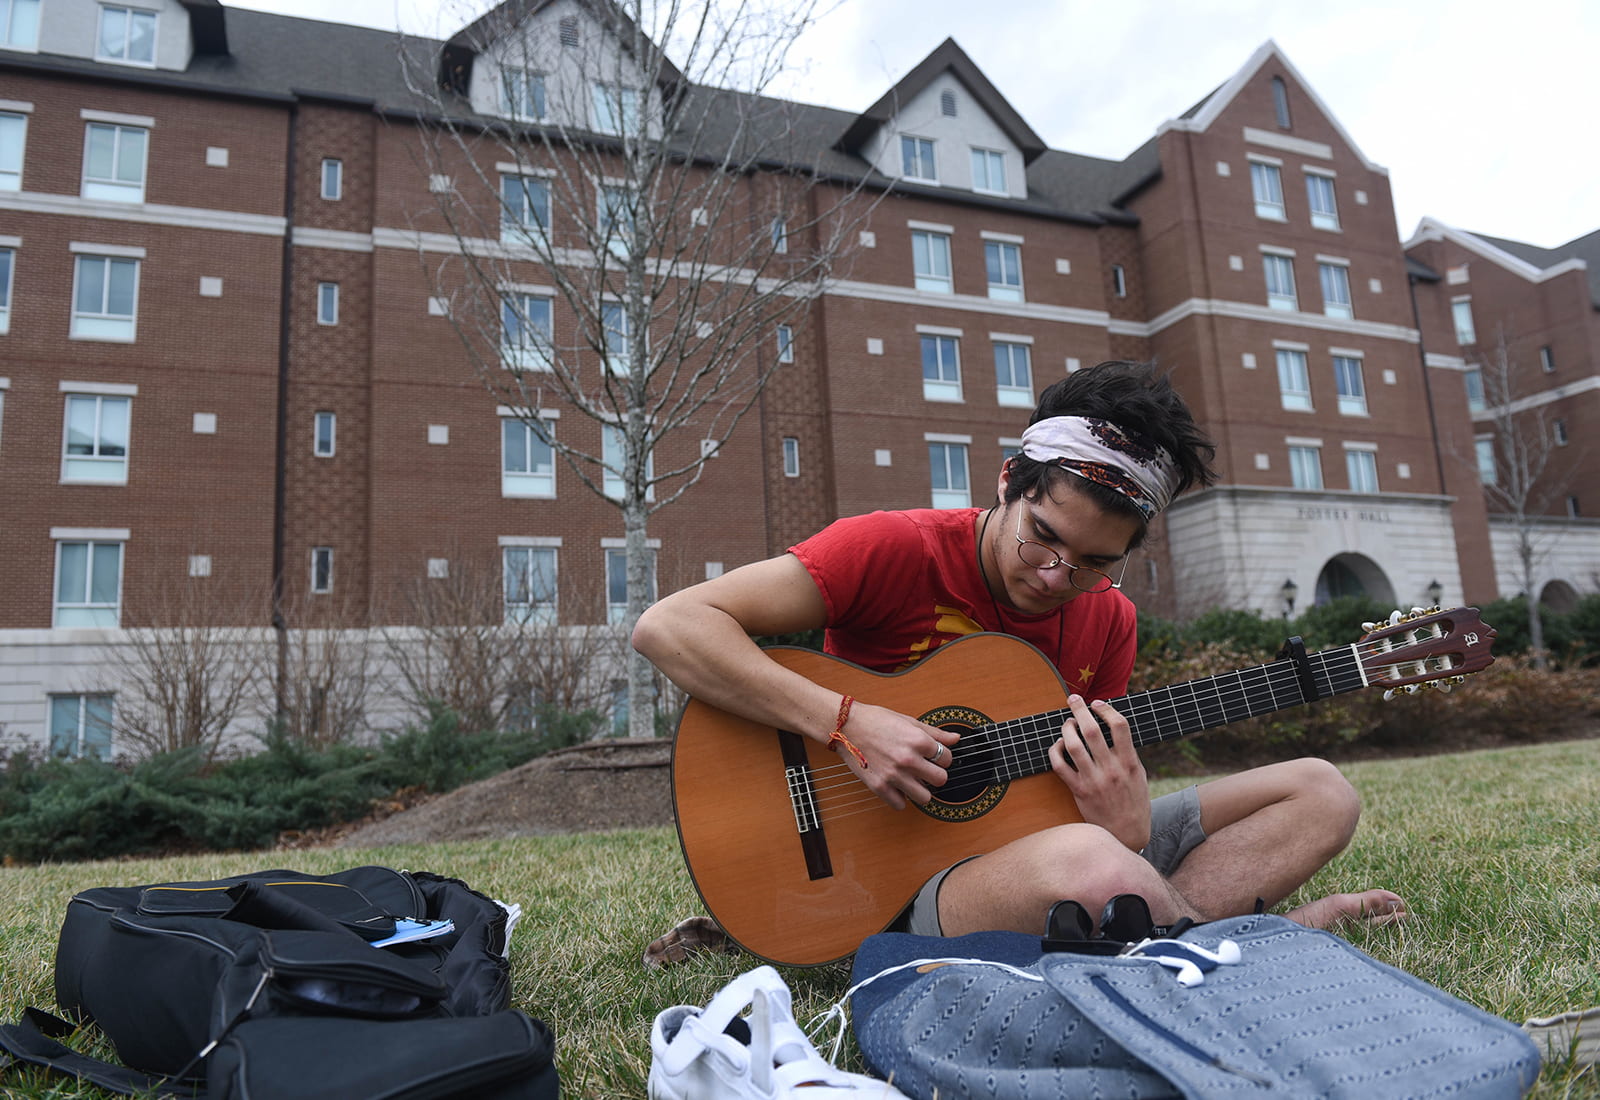 A student playing guitar on the lawn of Belmont University